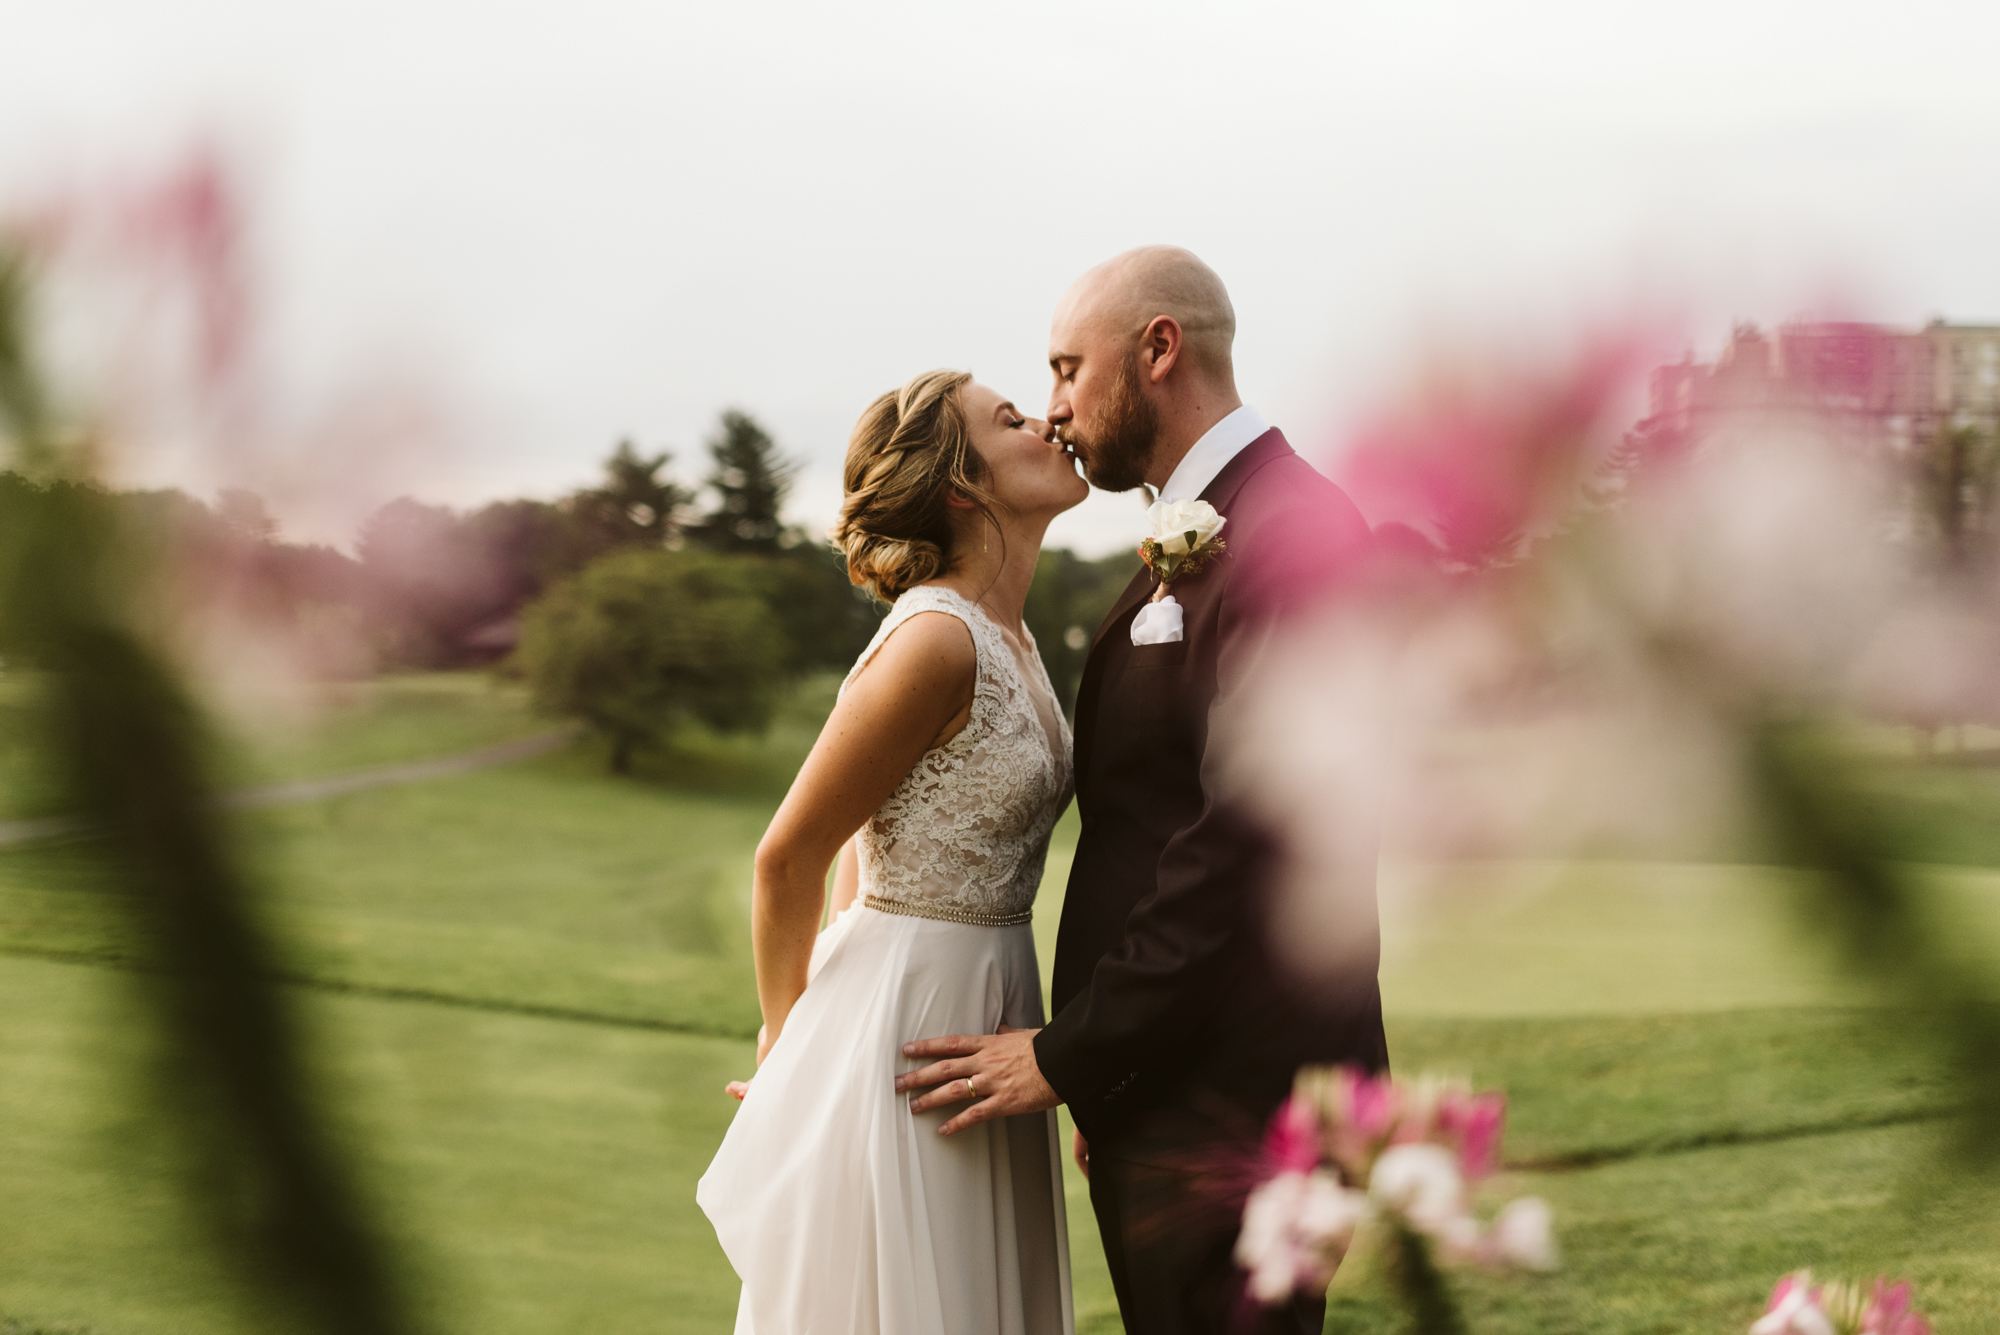 Elegant, Columbia Country Club, Chevy Chase Maryland, Baltimore Wedding Photographer, Classic, Traditional, Romantic Photo of Bride and Groom Kissing, Pink and White Flowers